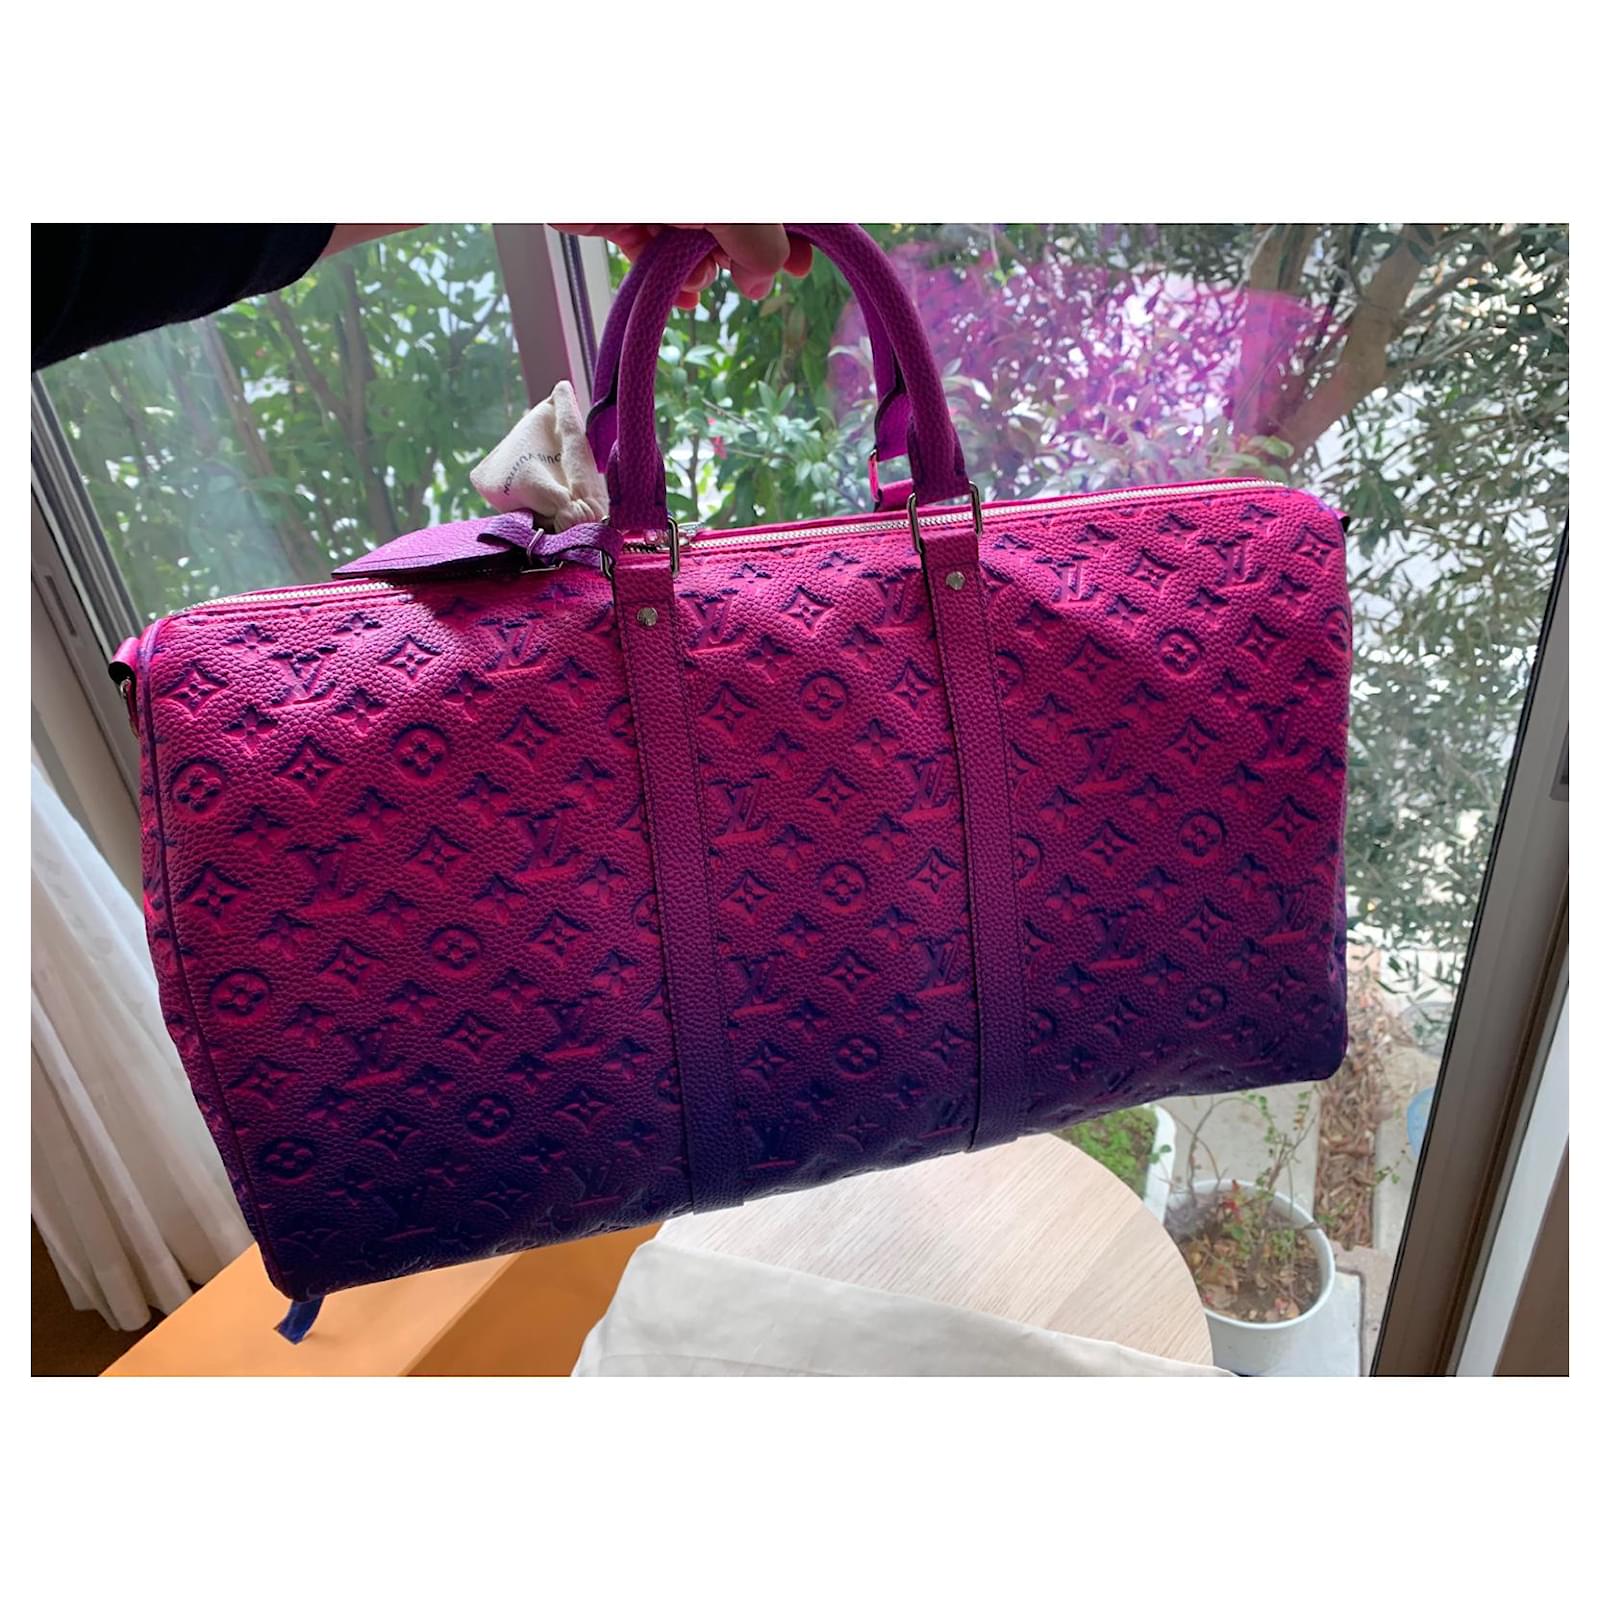 NEW-Louis Vuitton keepall 50 strap Travel bag Spray in Pink/Blue / Virgil  Abloh